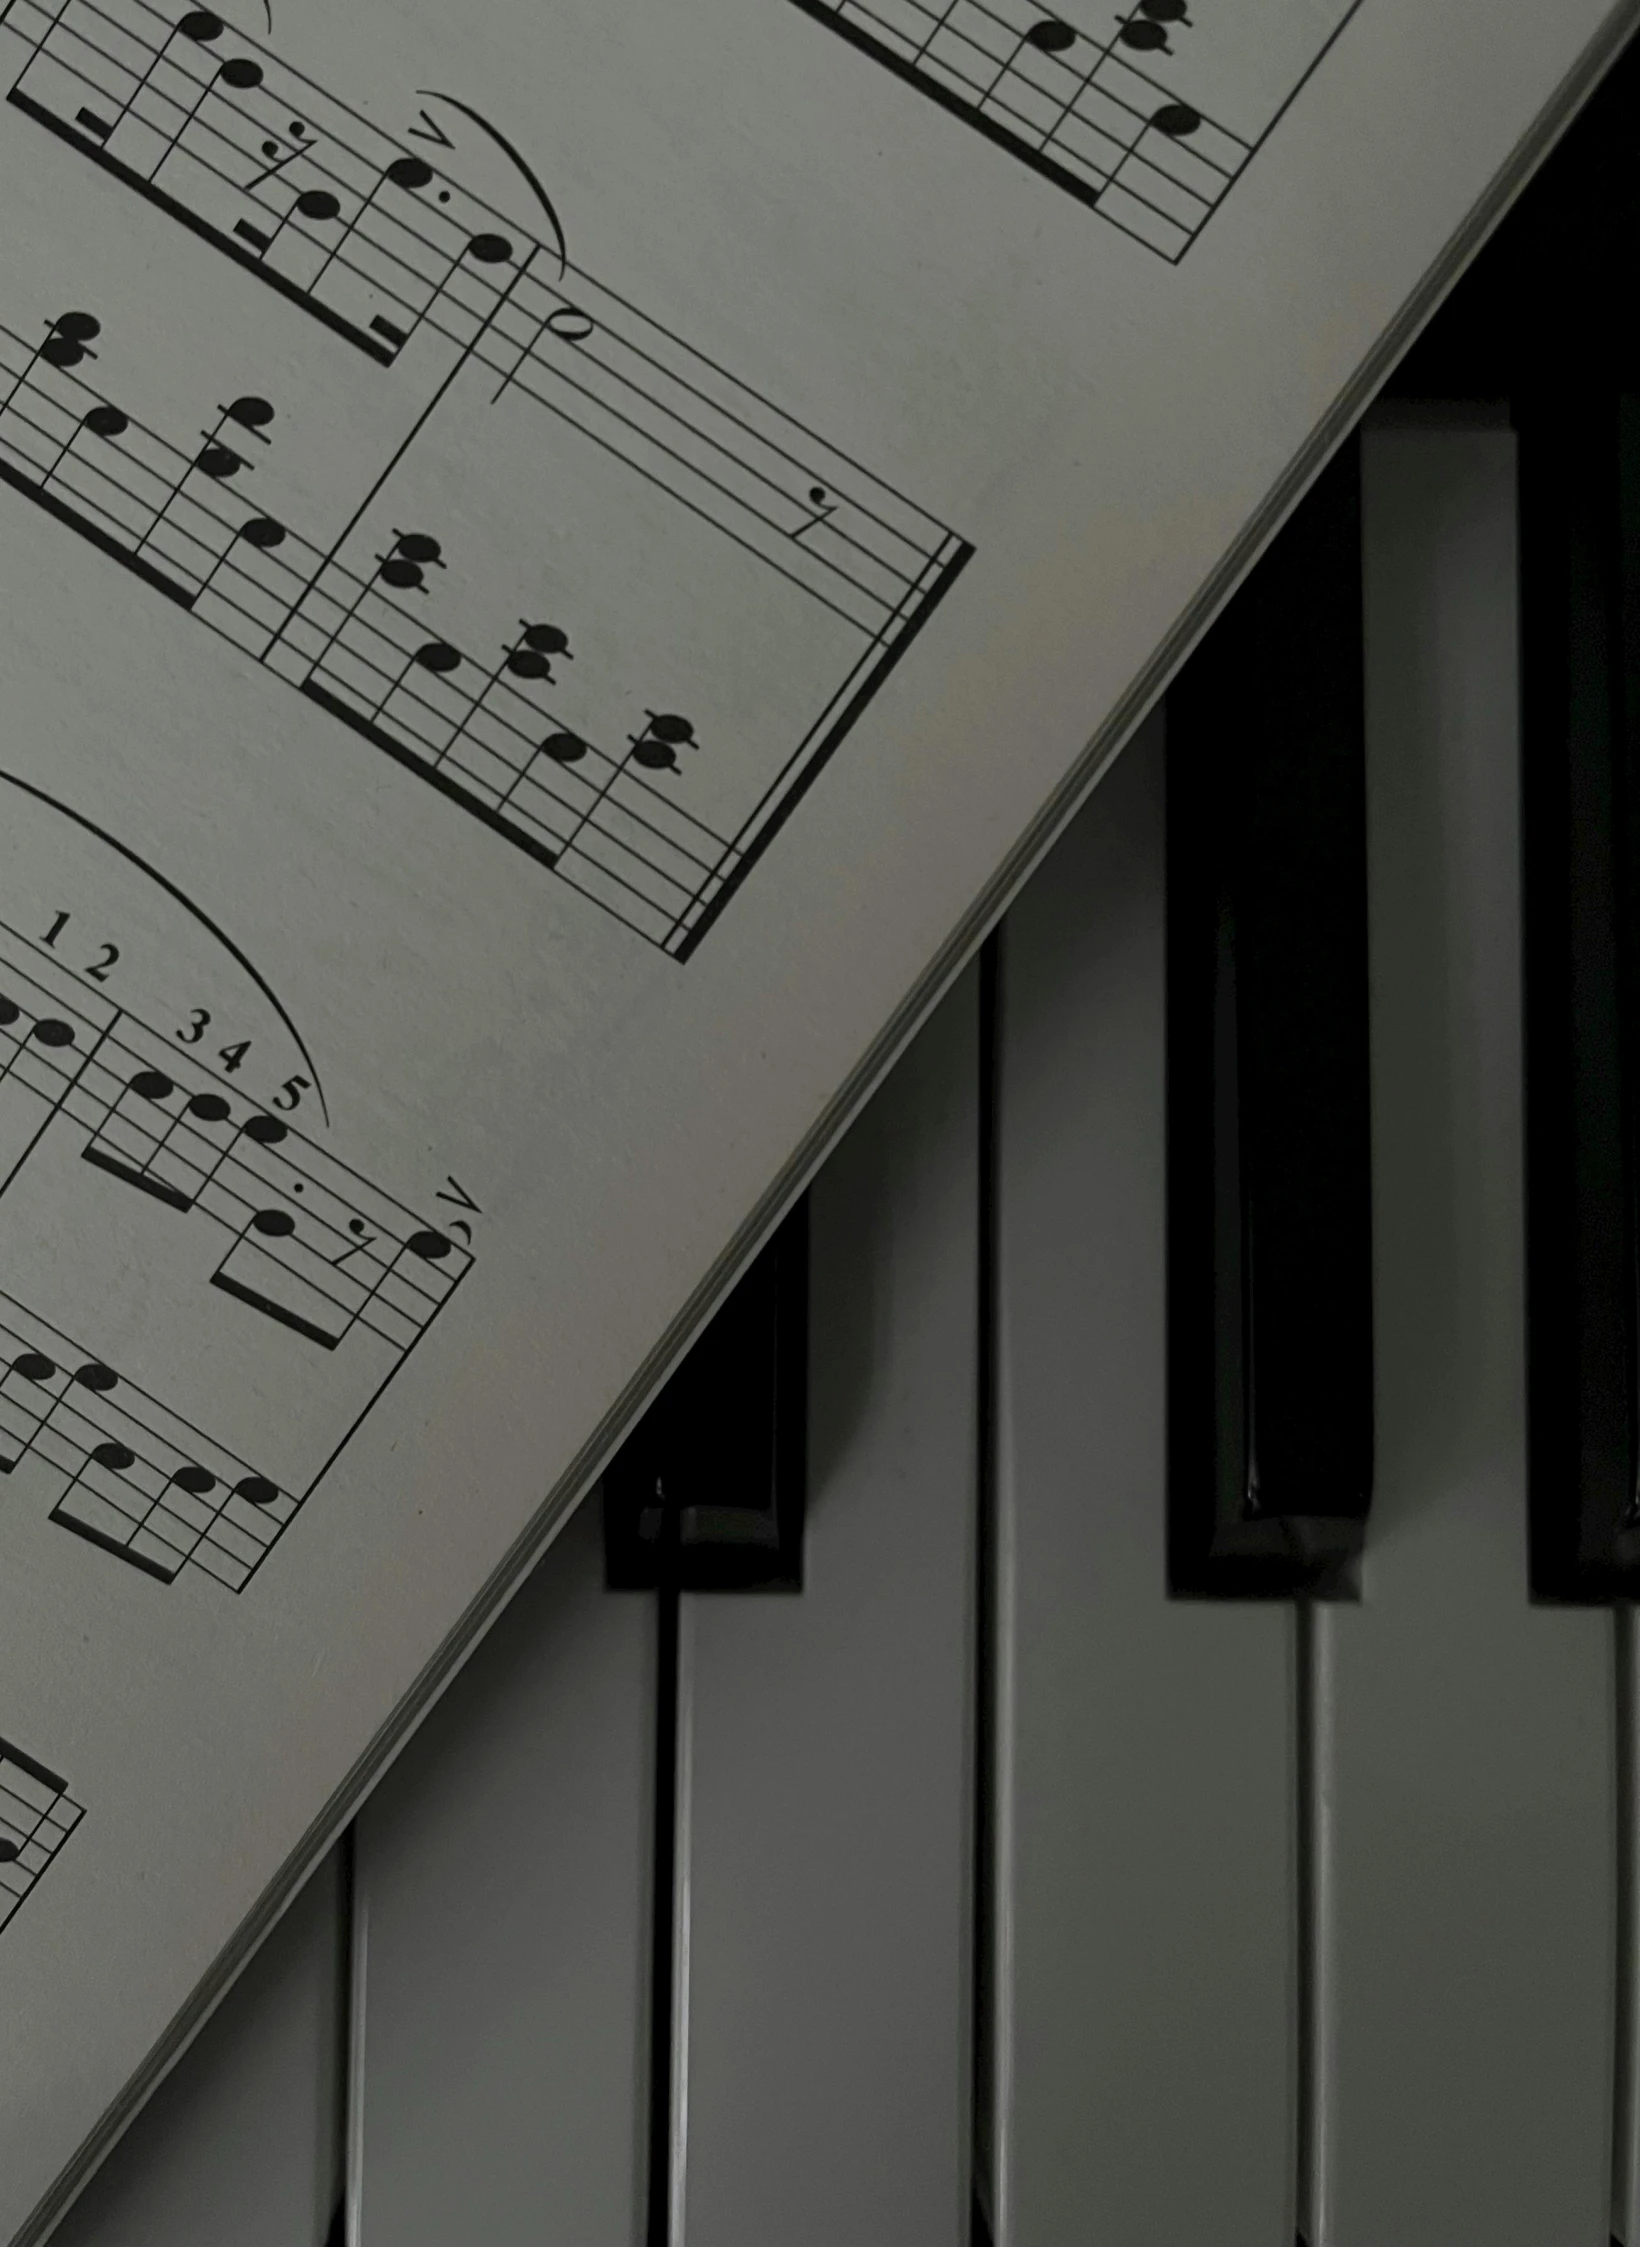 a sheet of music that has been placed near piano keys